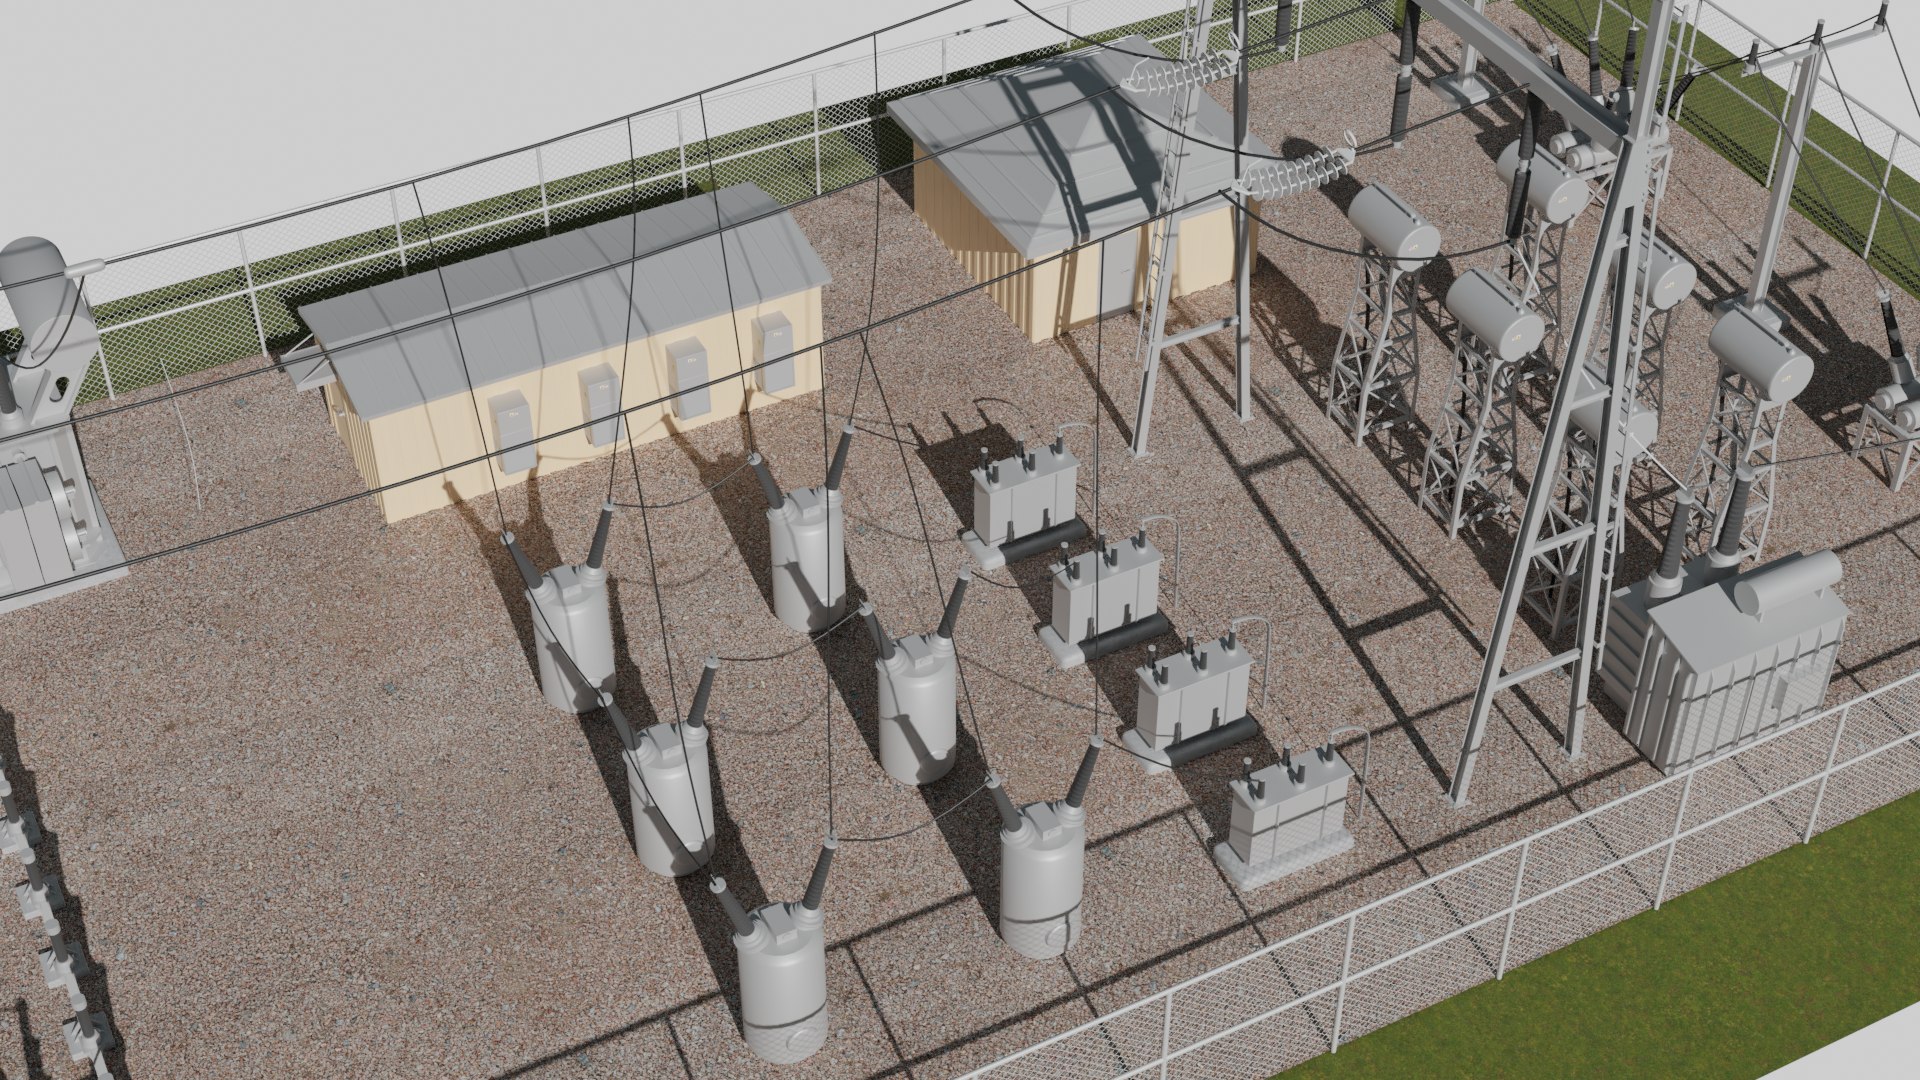 Electrical Substation 3D Model - TurboSquid 1907443